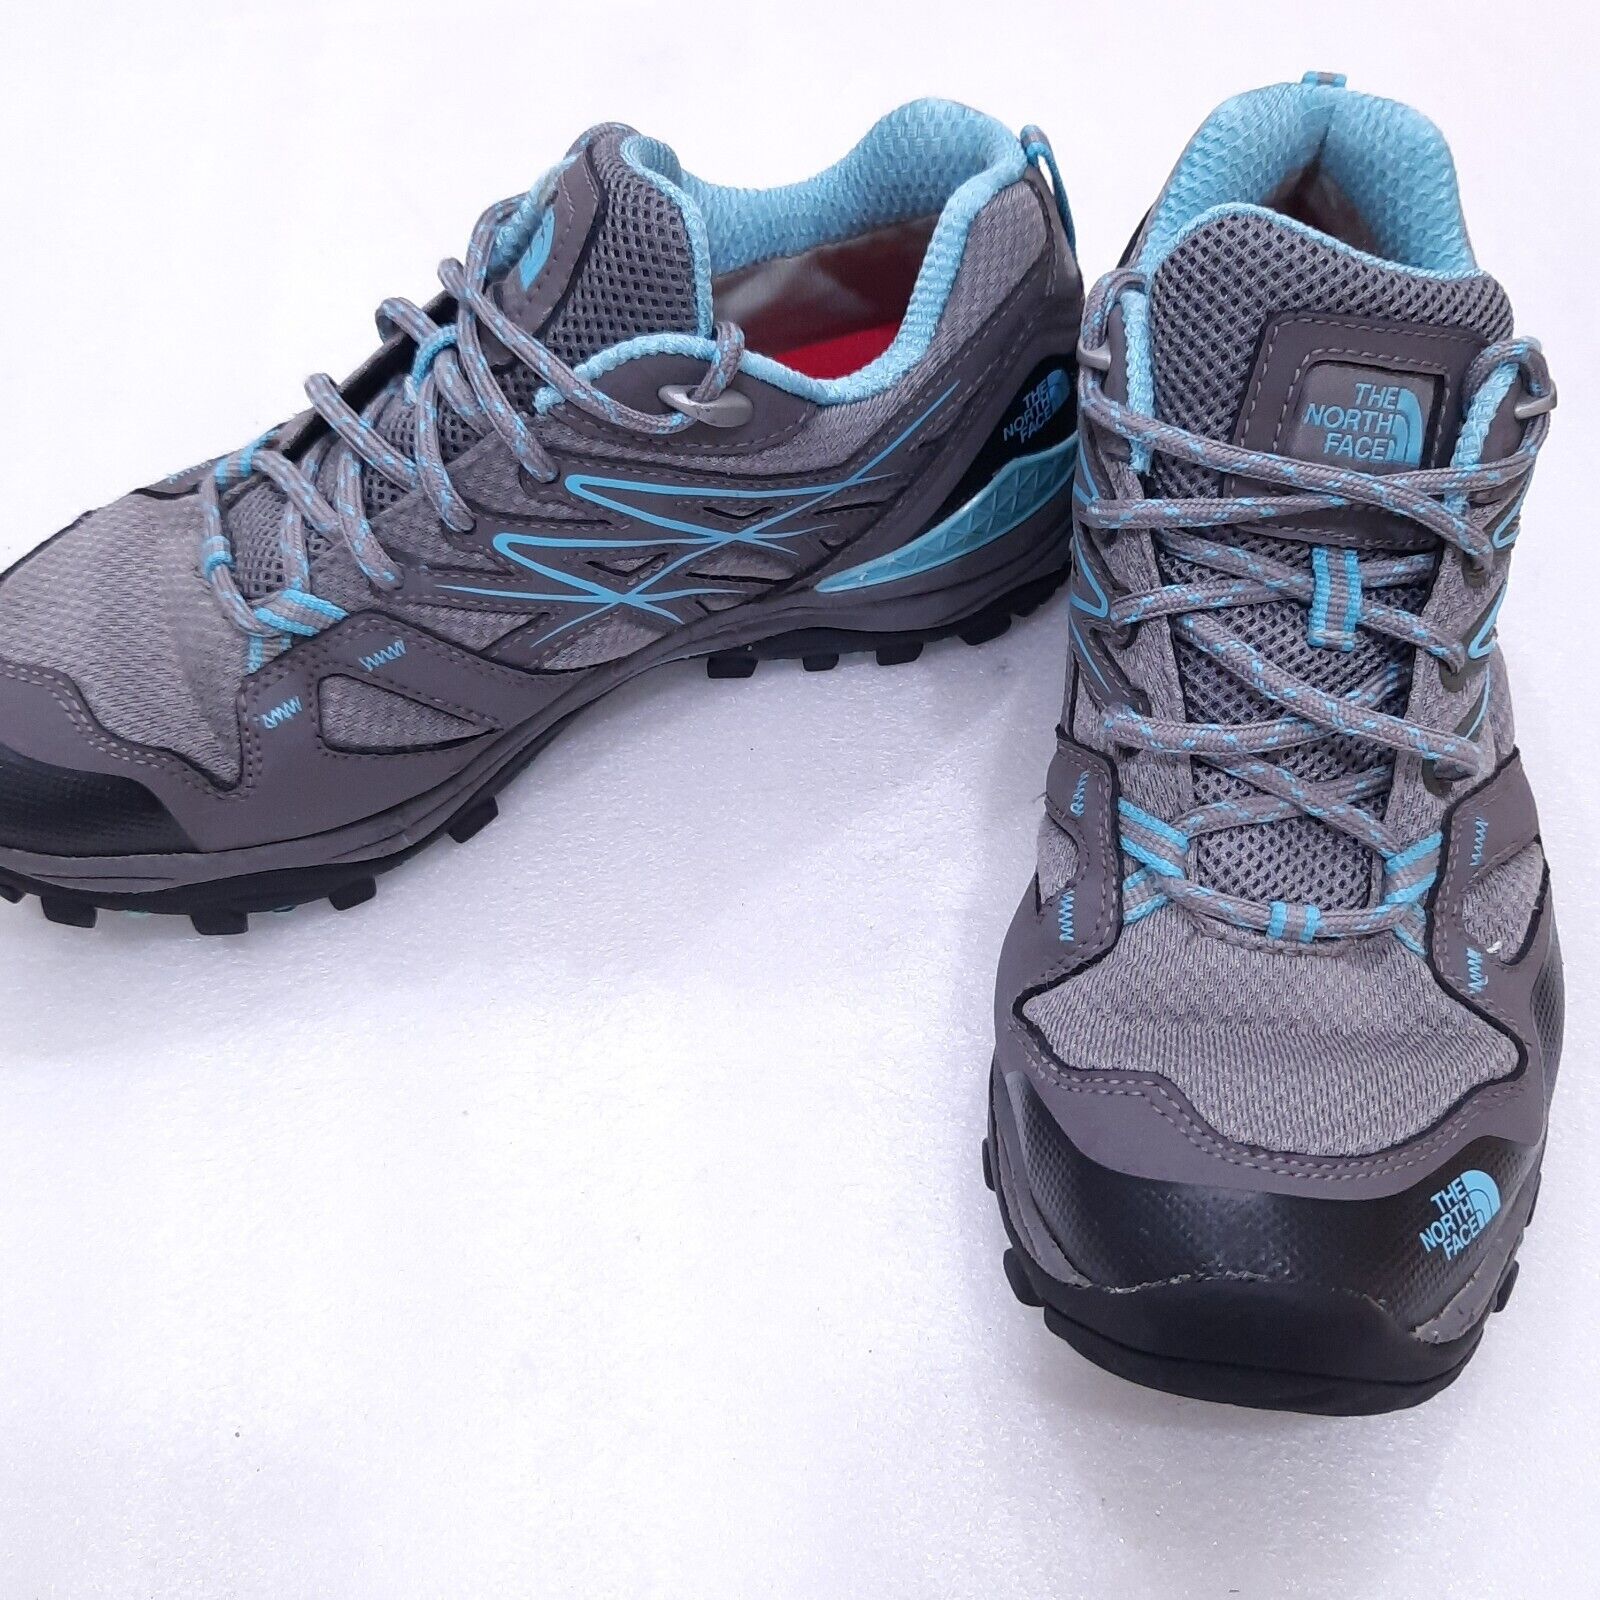 The North Face Fastpack GTX Low Waterproof Women&#039;s Hiking Shoes Size 9 | eBay